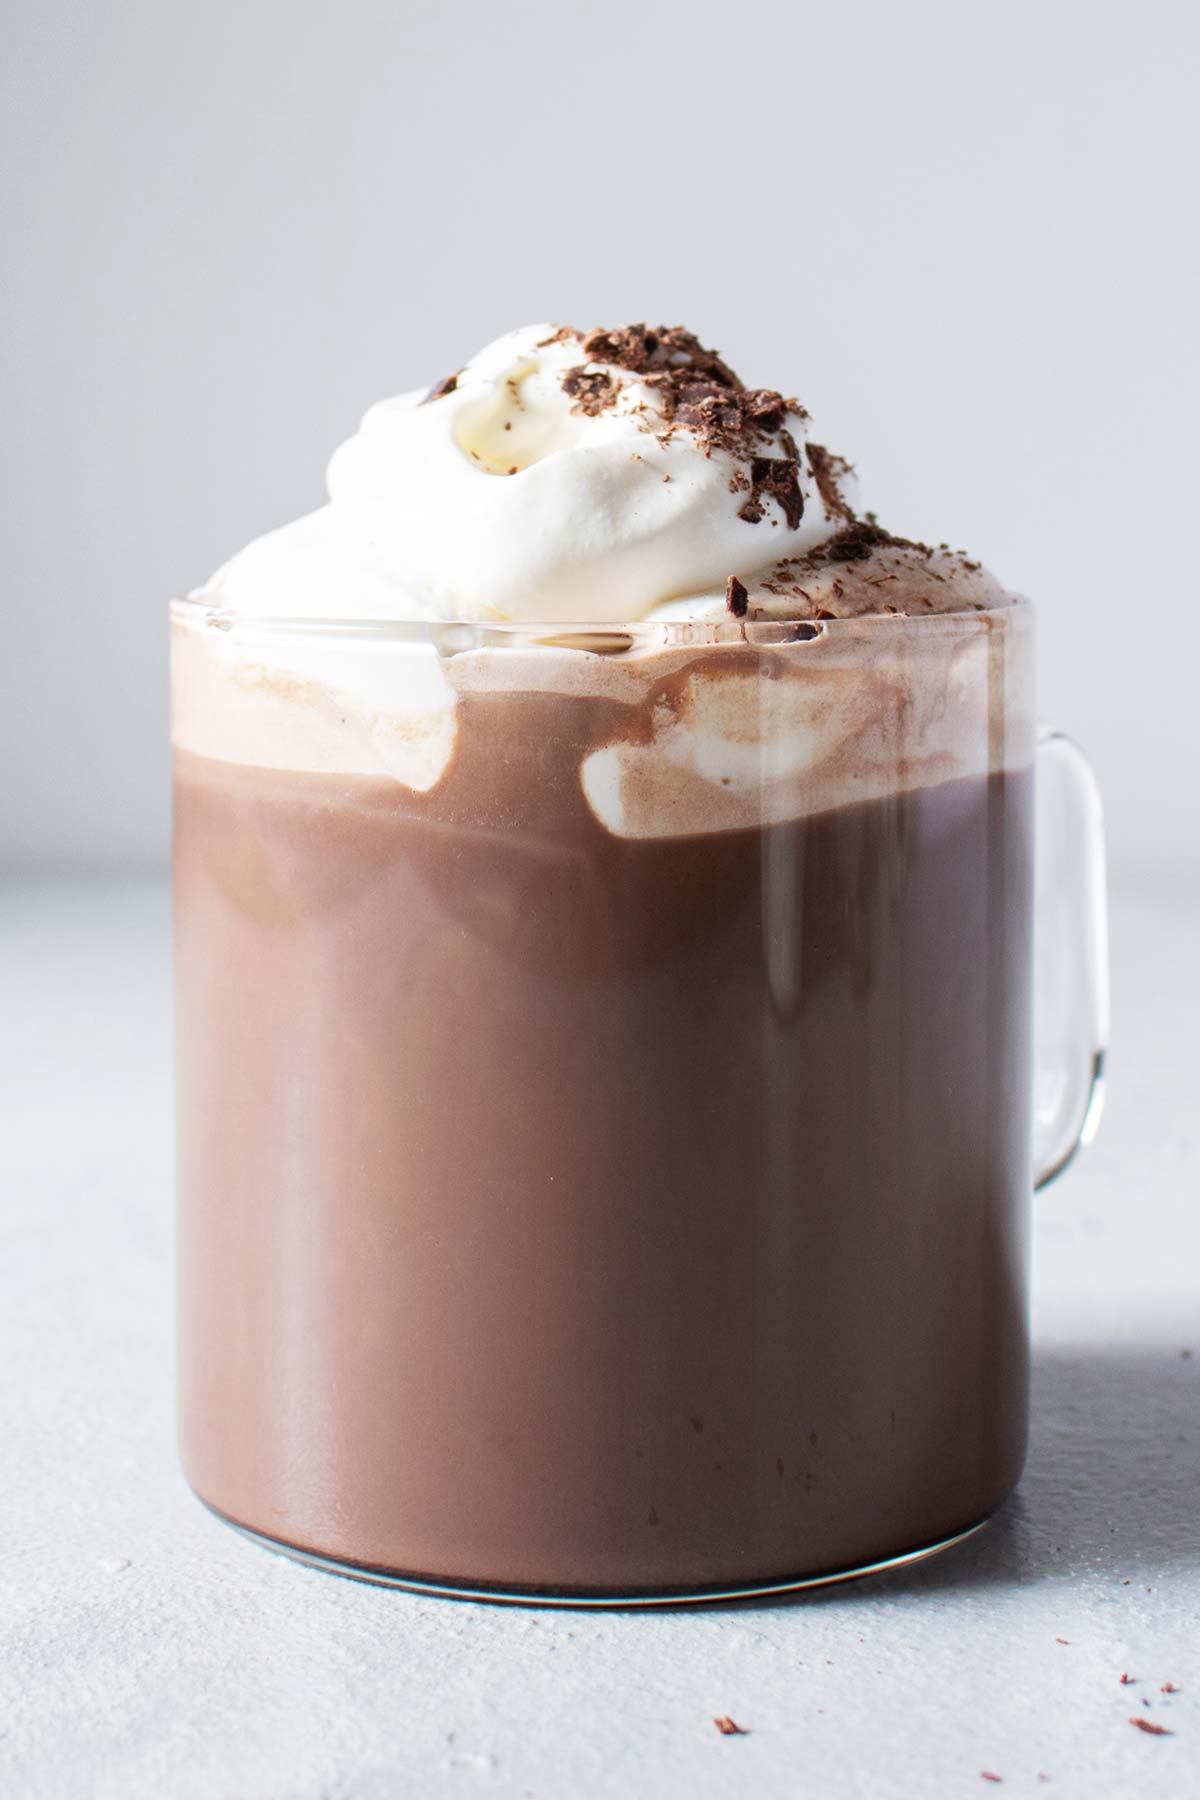 Hot chocolate in a glass mug with whipped cream and grated chocolate.